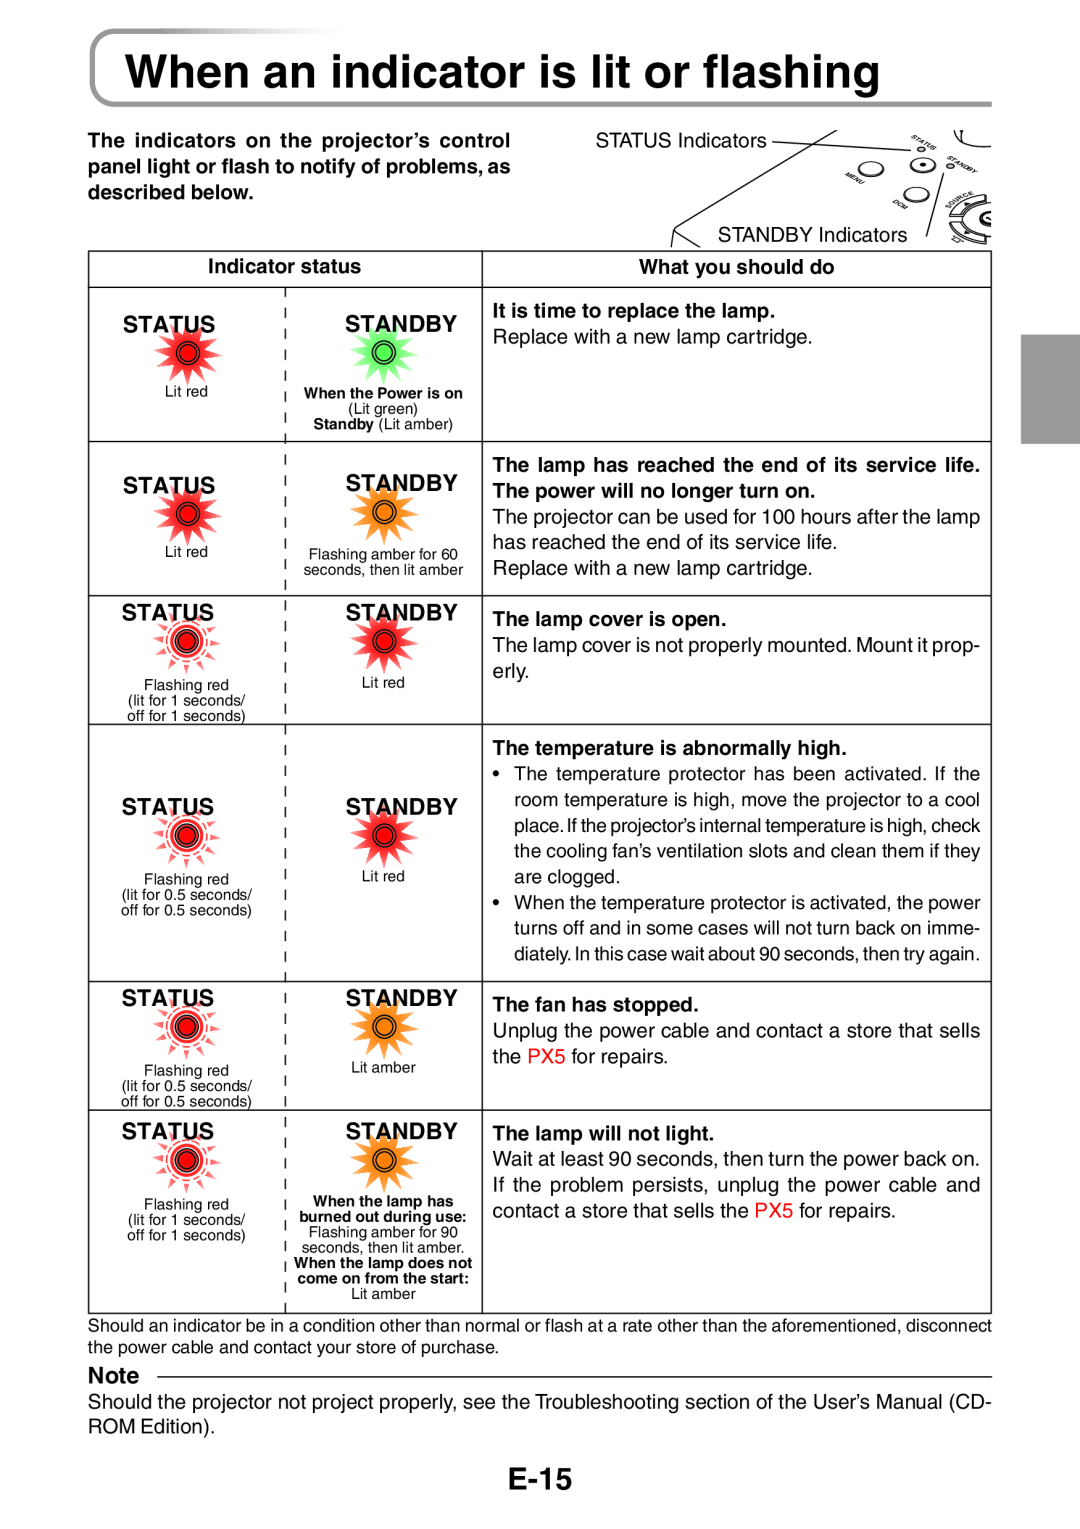 3M PX5 user manual When an indicator is lit or flashing, E-15, Status, Standby 